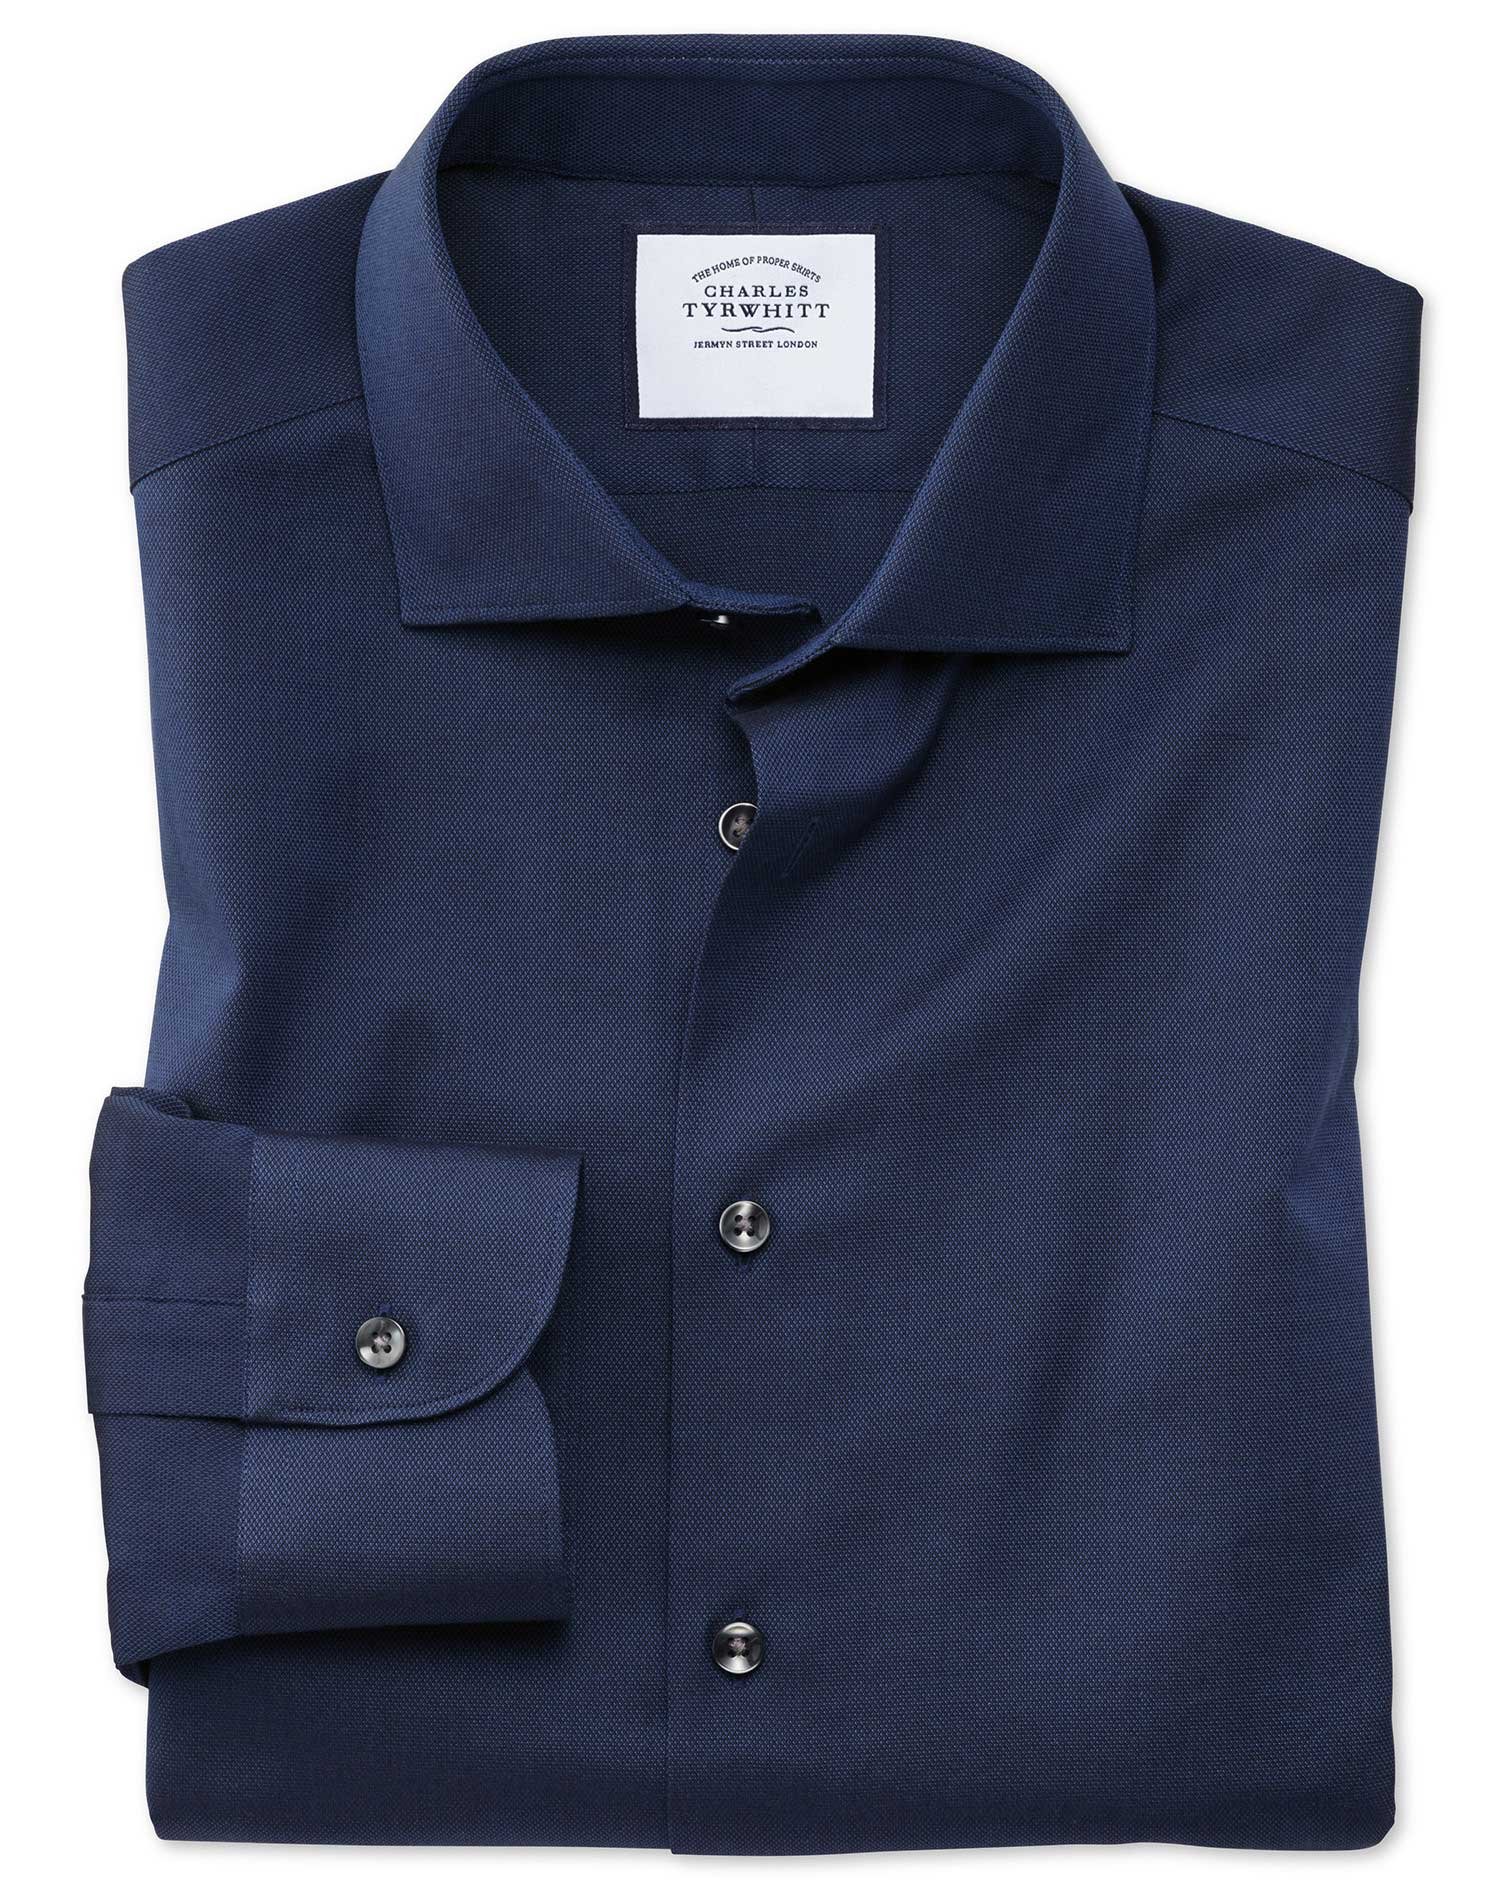 Charles Tyrwhitt: 3 shirts for only $99.95! | Milled